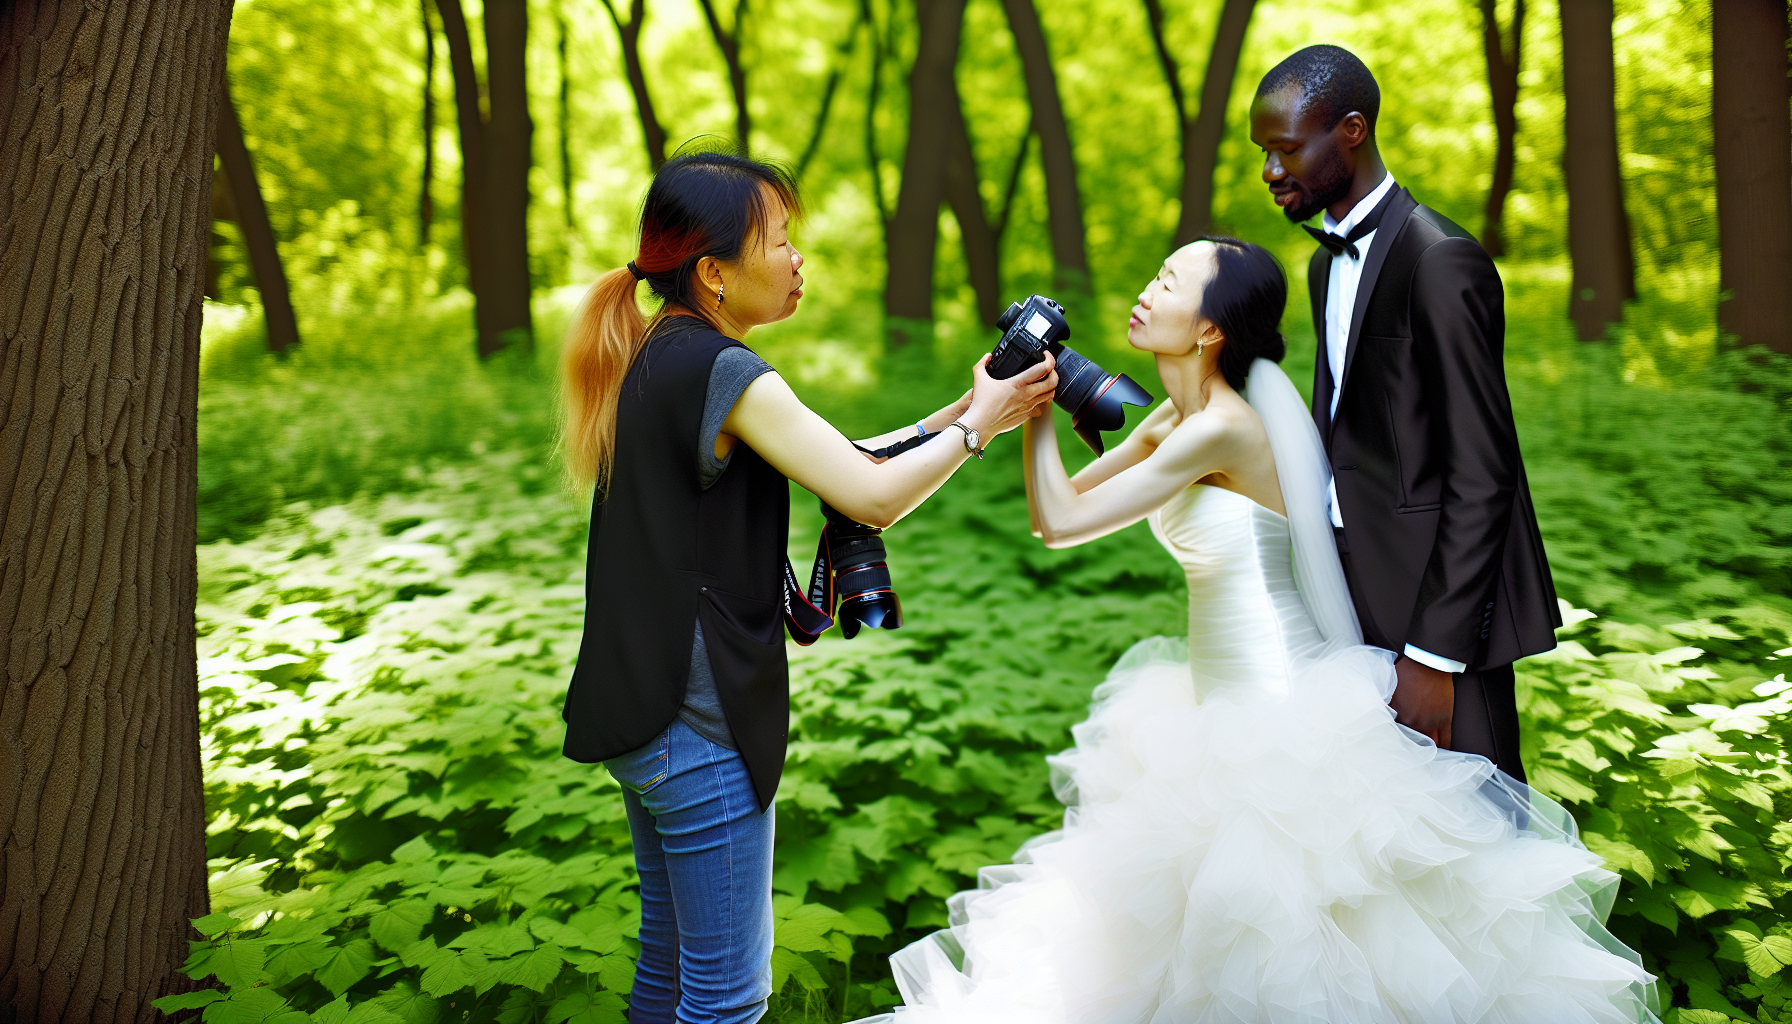 Wedding photographer capturing a couple in a scenic location